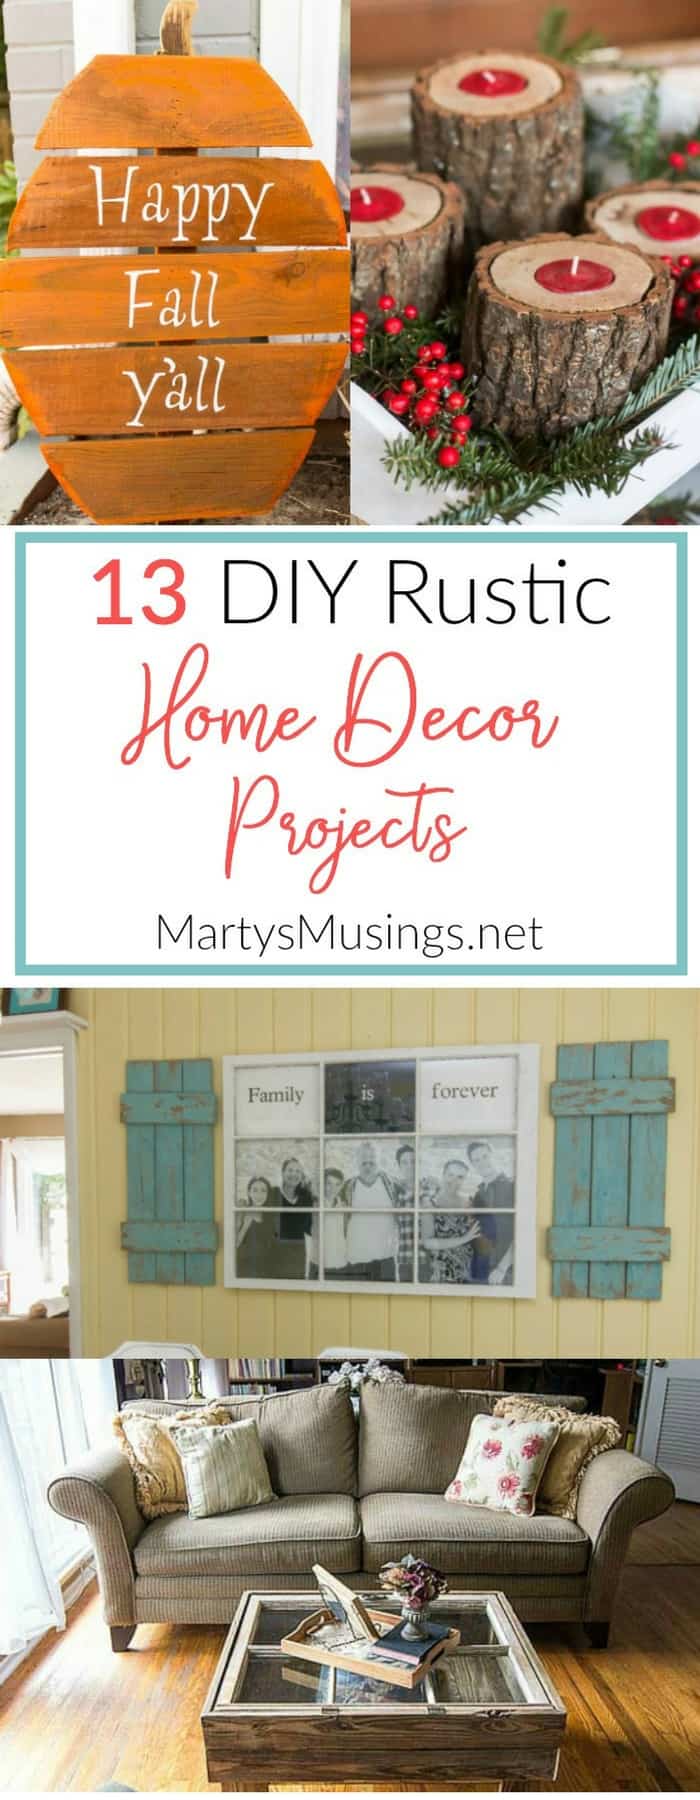 24 Rustic Home Decor Ideas On A Budget Pictures To Decoration